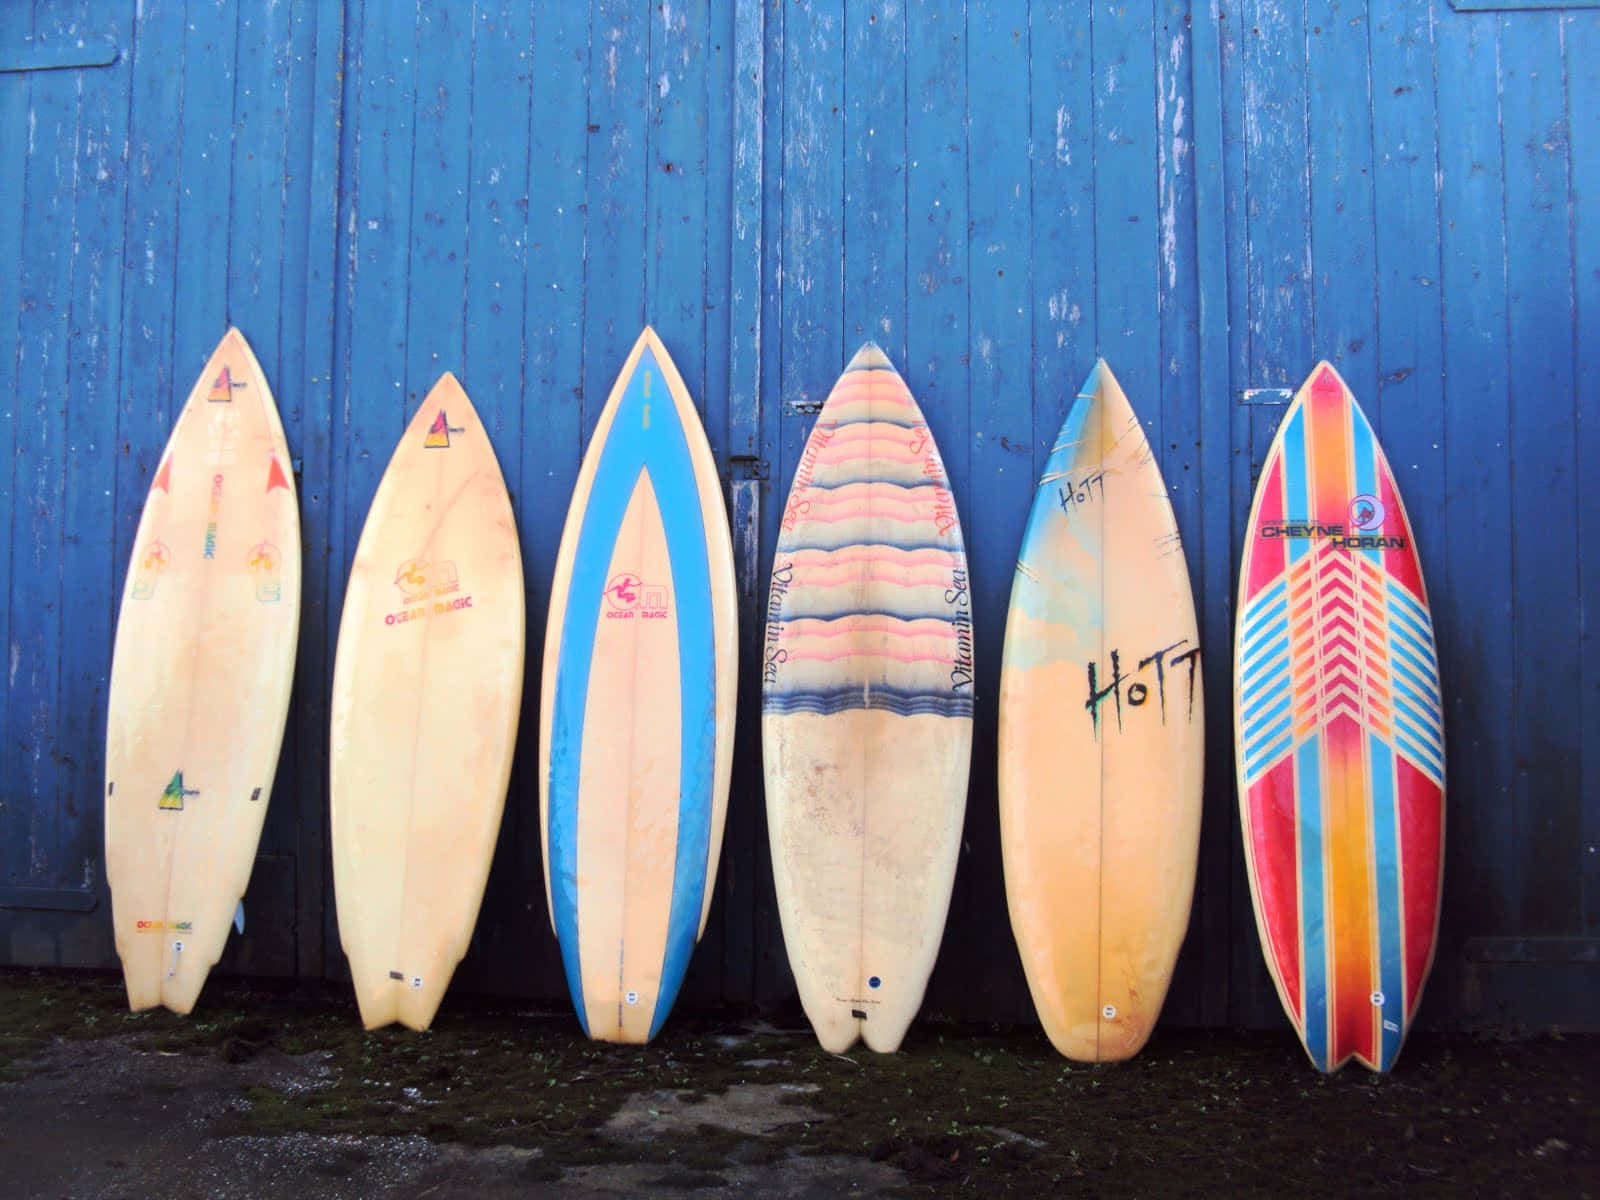 "Heading to the Beach for some Vintage Surf!" Wallpaper